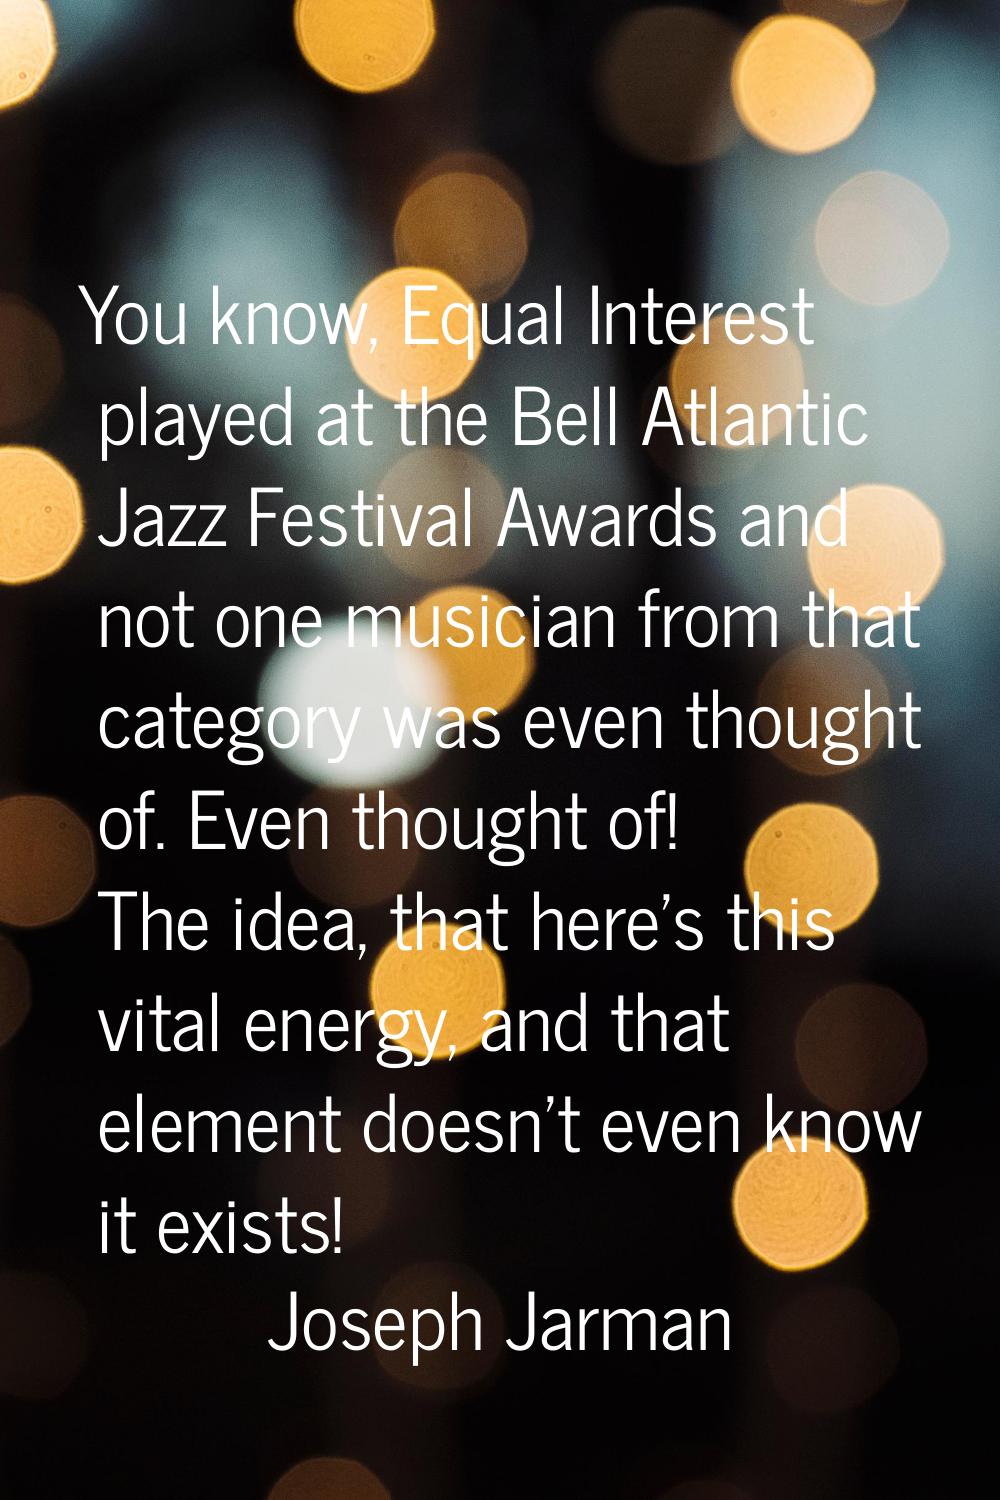 You know, Equal Interest played at the Bell Atlantic Jazz Festival Awards and not one musician from